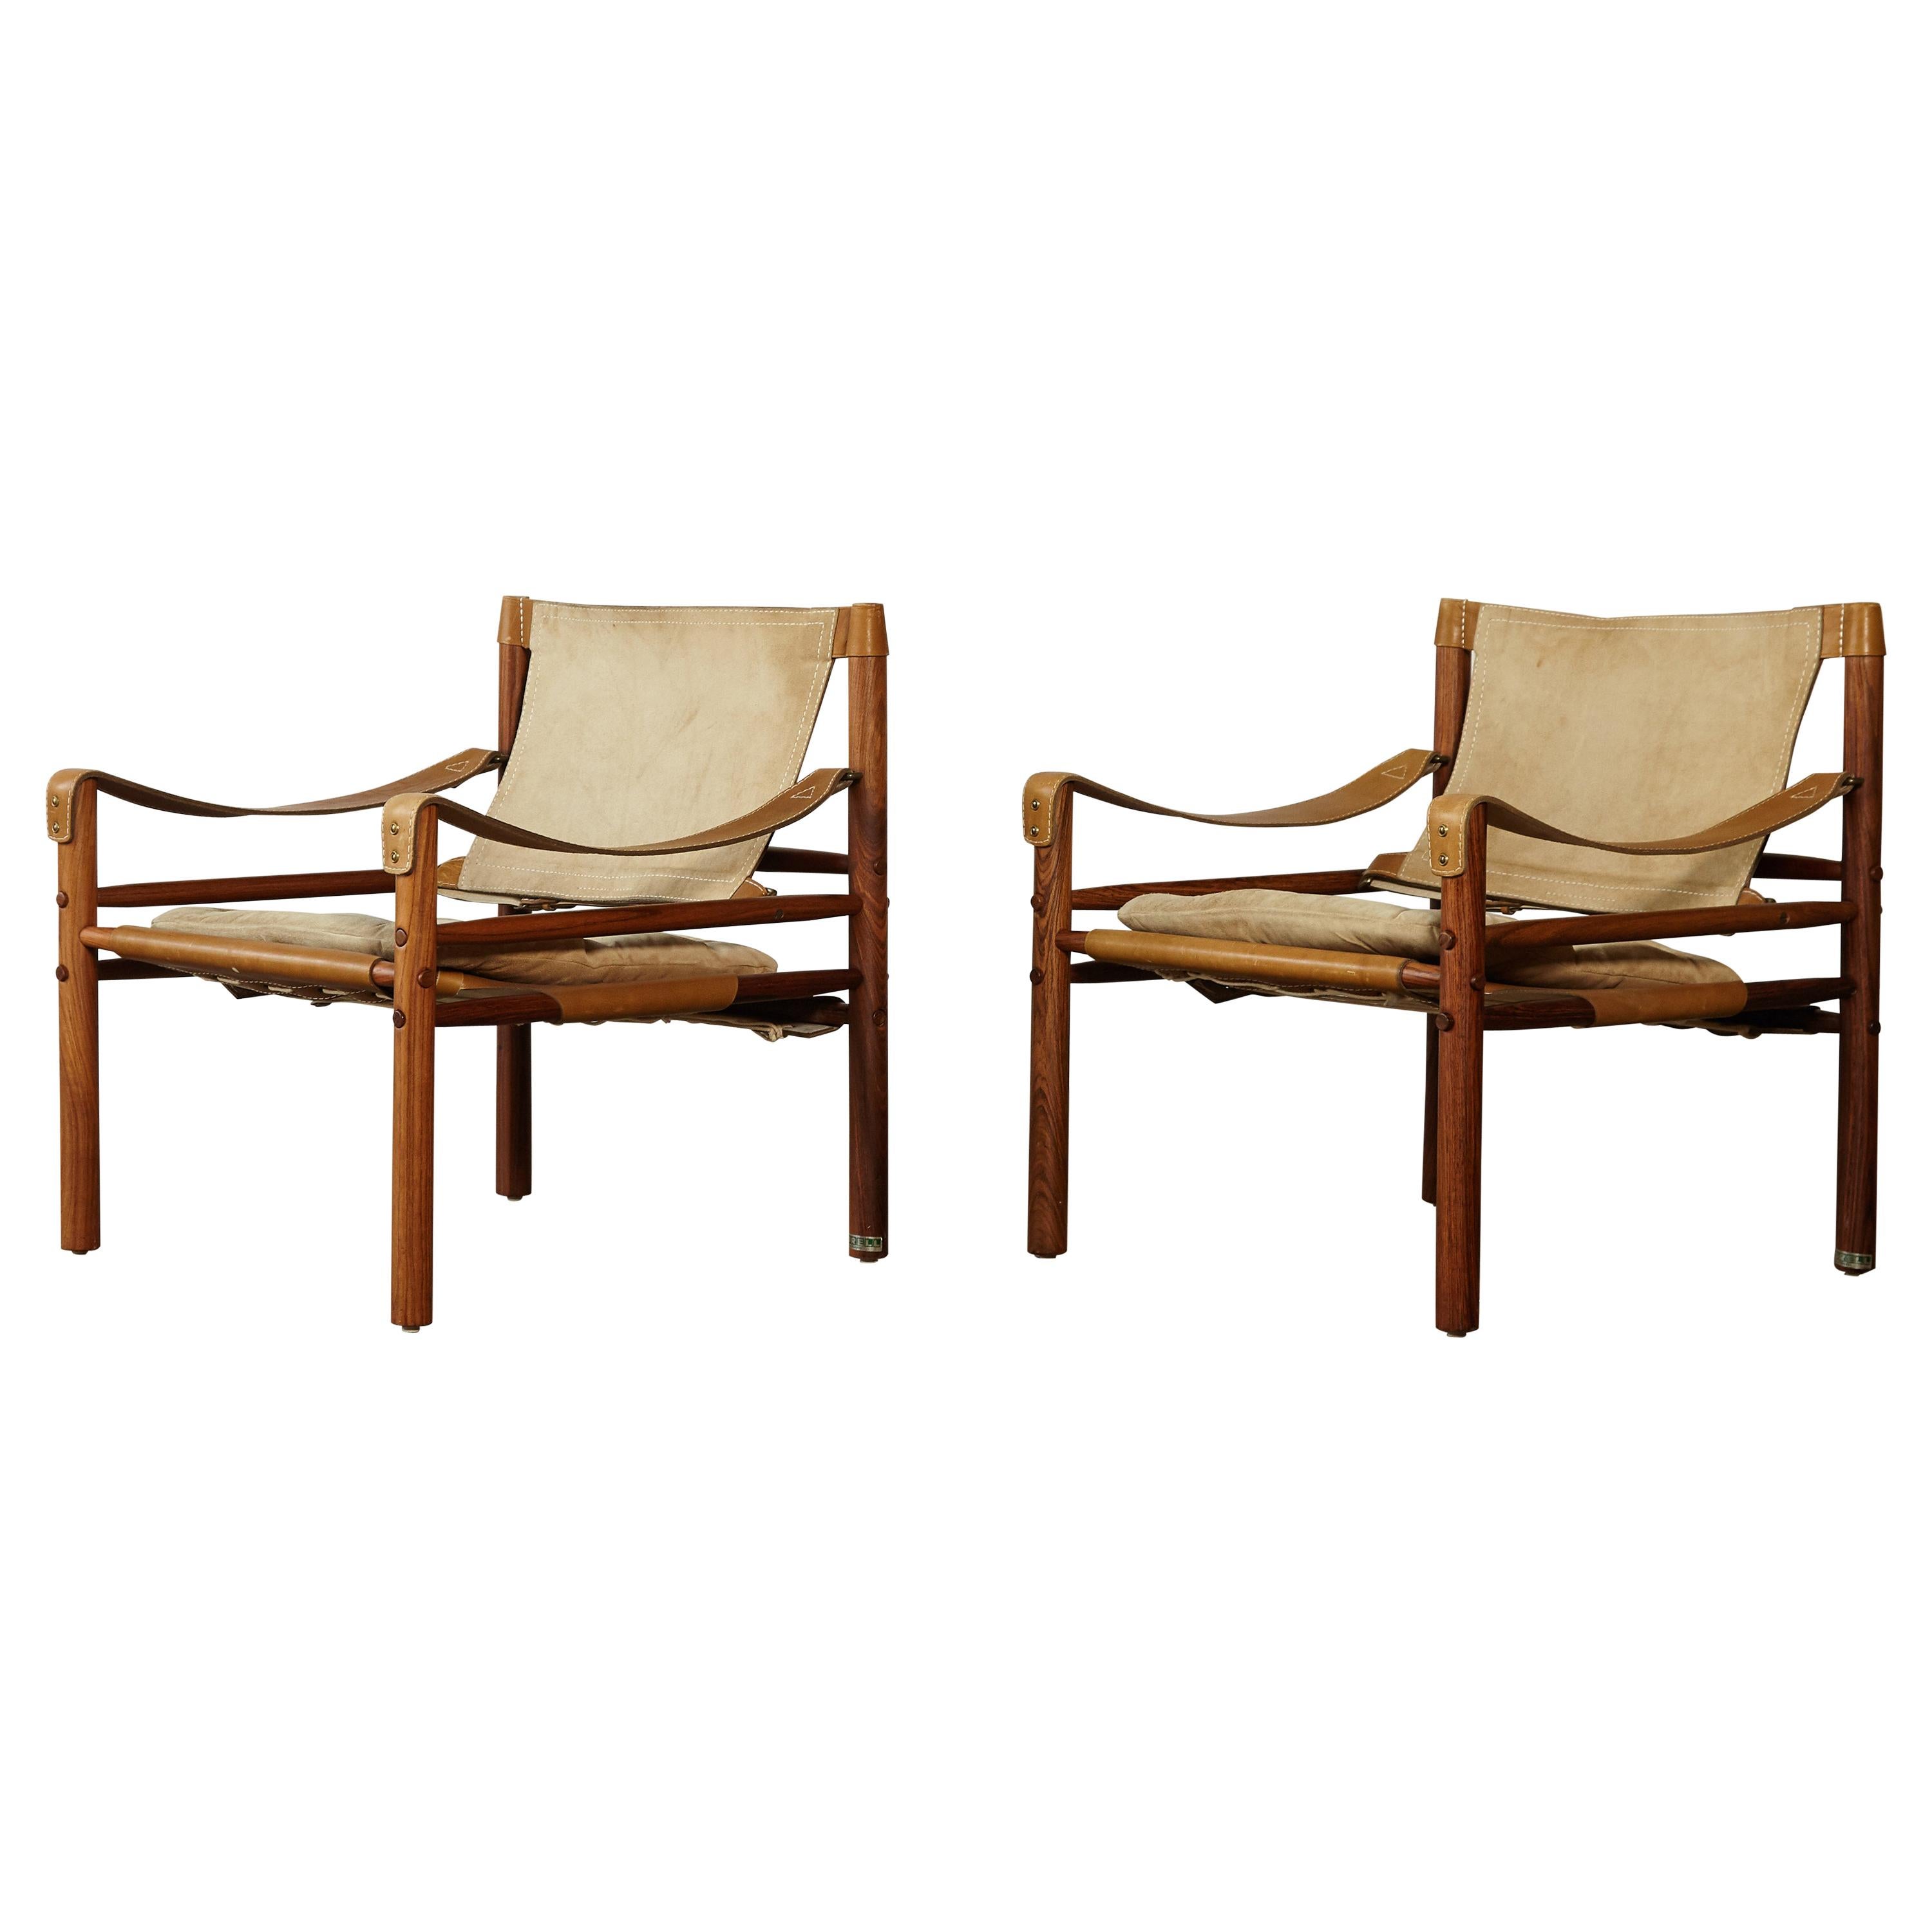 Pair of Suede and Rosewood Arne Norell Safari Chairs, Sweden, 1970s